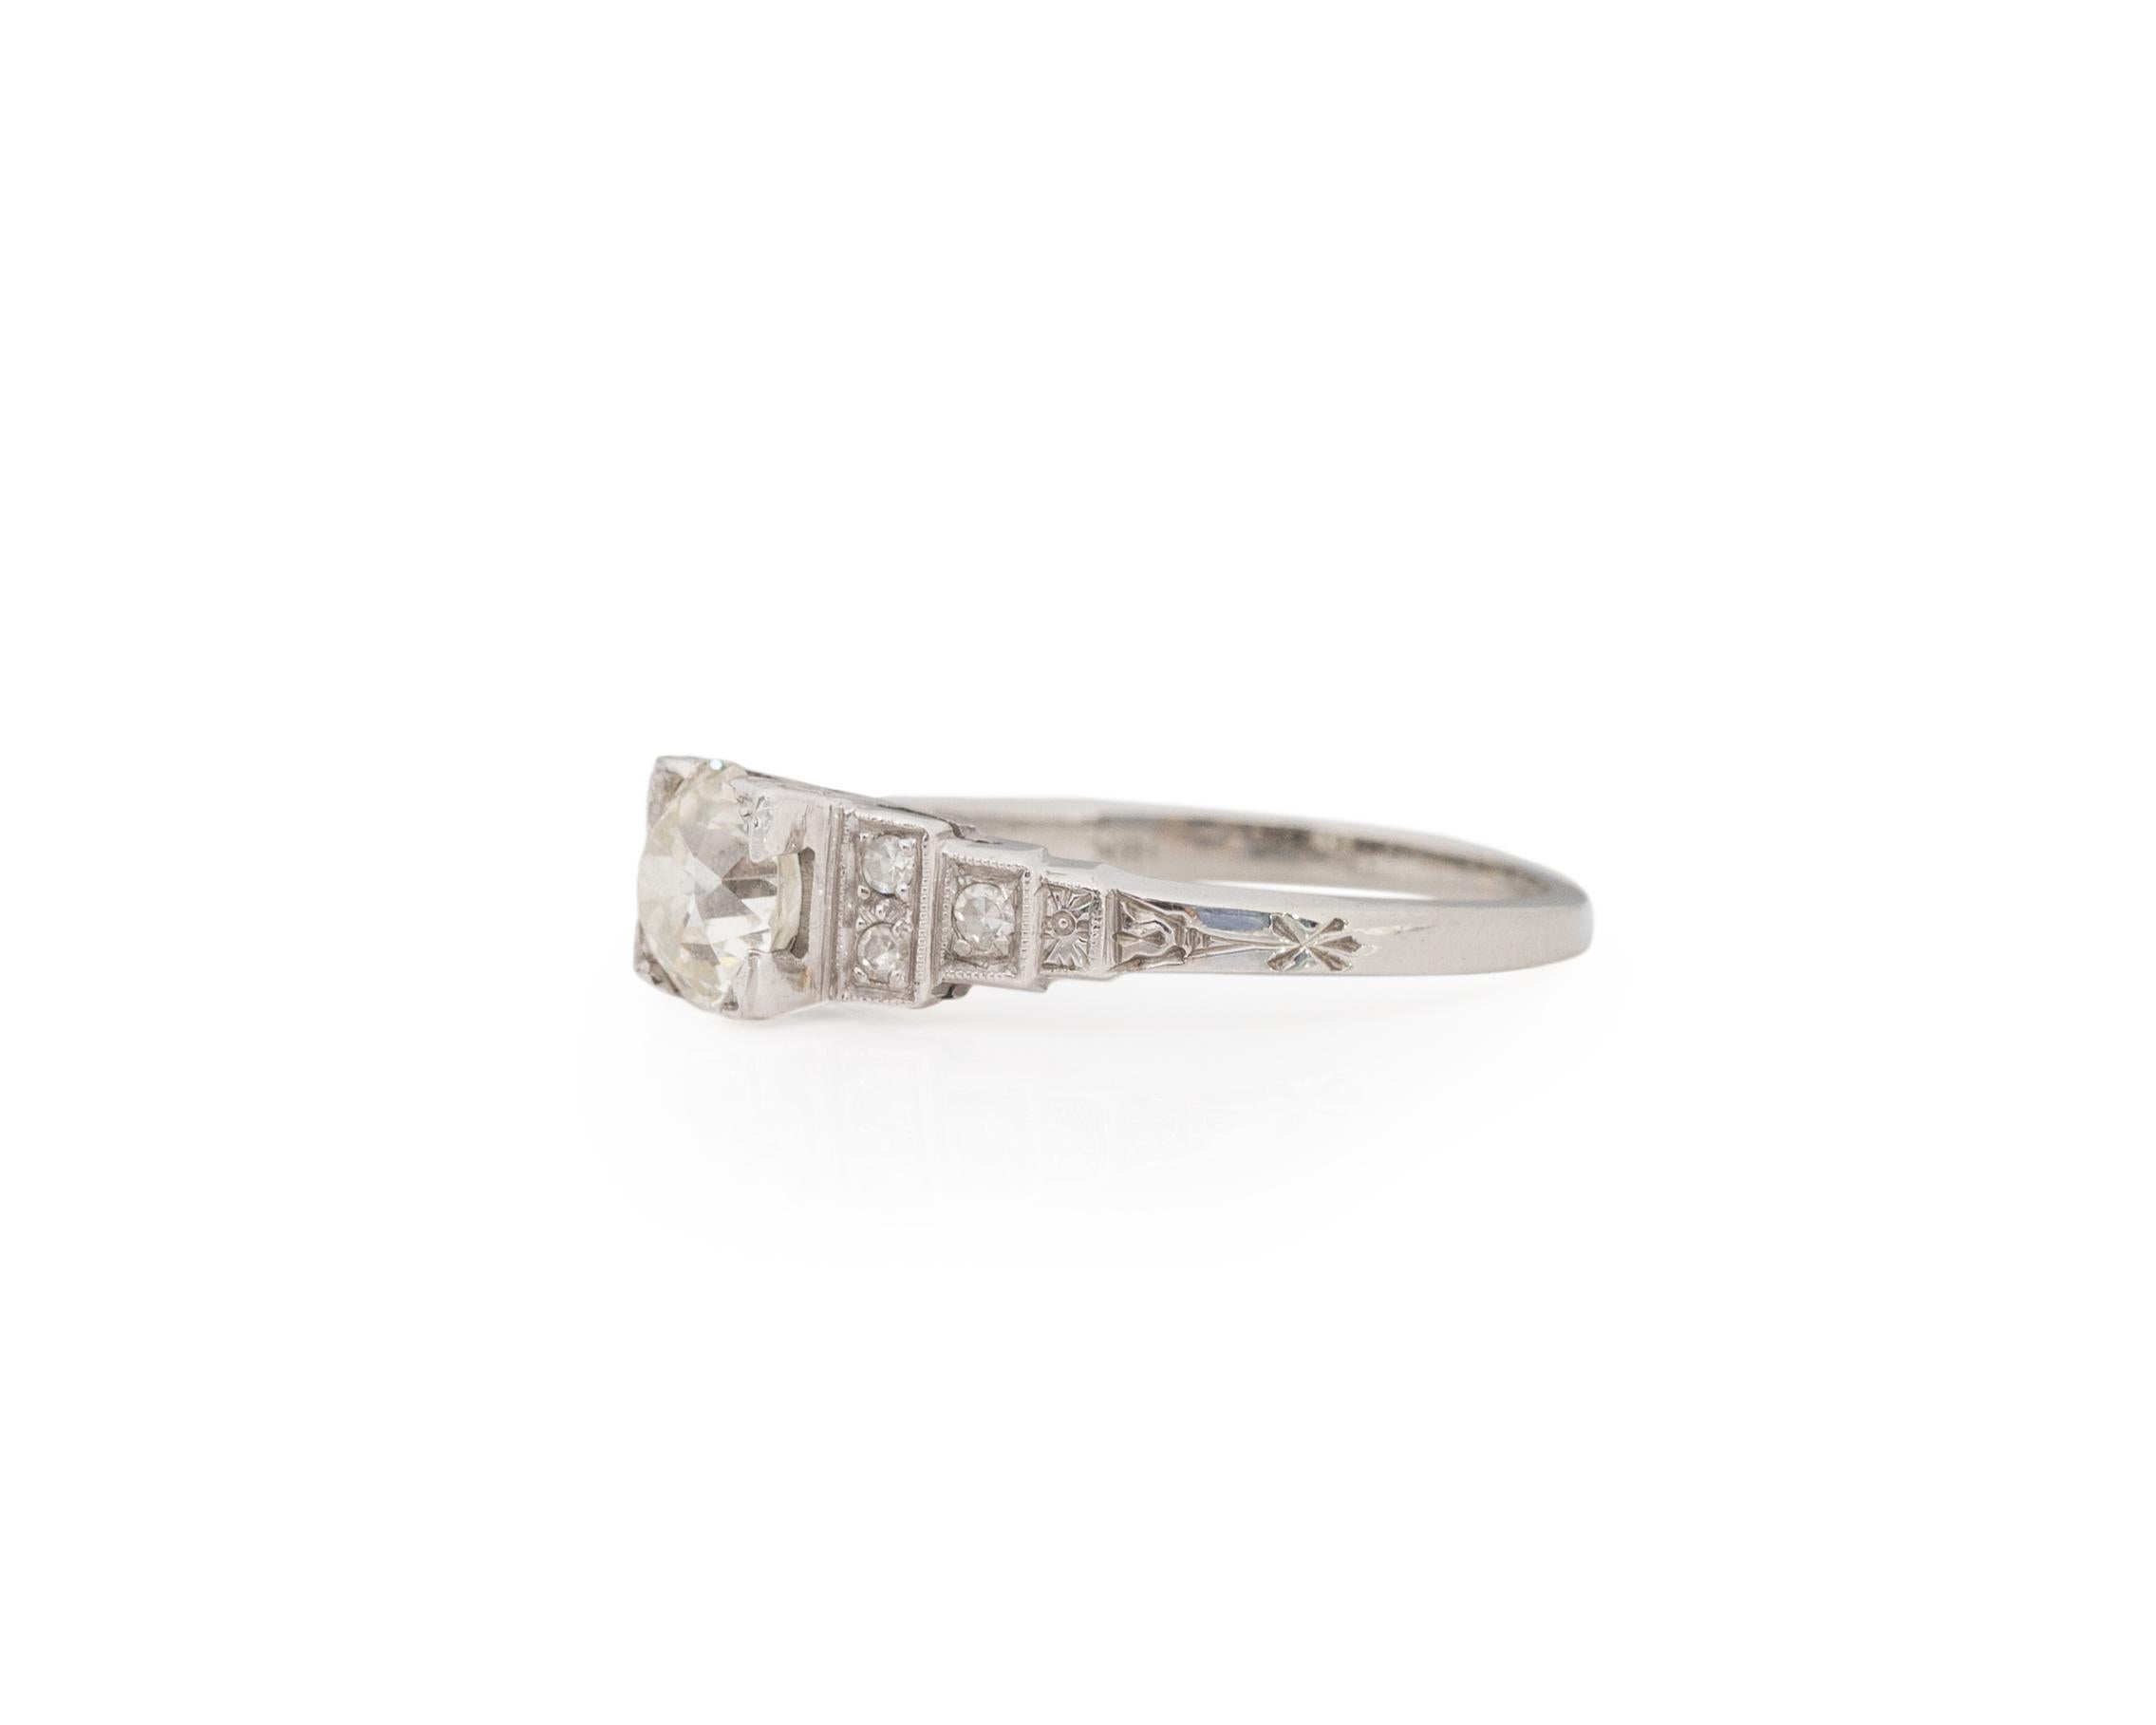 Ring Size: 6.5
Metal Type: Platinum [Hallmarked, and Tested]
Weight: grams

Center Diamond Details:
Weight: .90ct
Cut: Old European brilliant
Color: K
Clarity: VS

Finger to Top of Stone Measurement: 5.5mm
Shank/Band Width: 1.7mm
Condition: Excellent